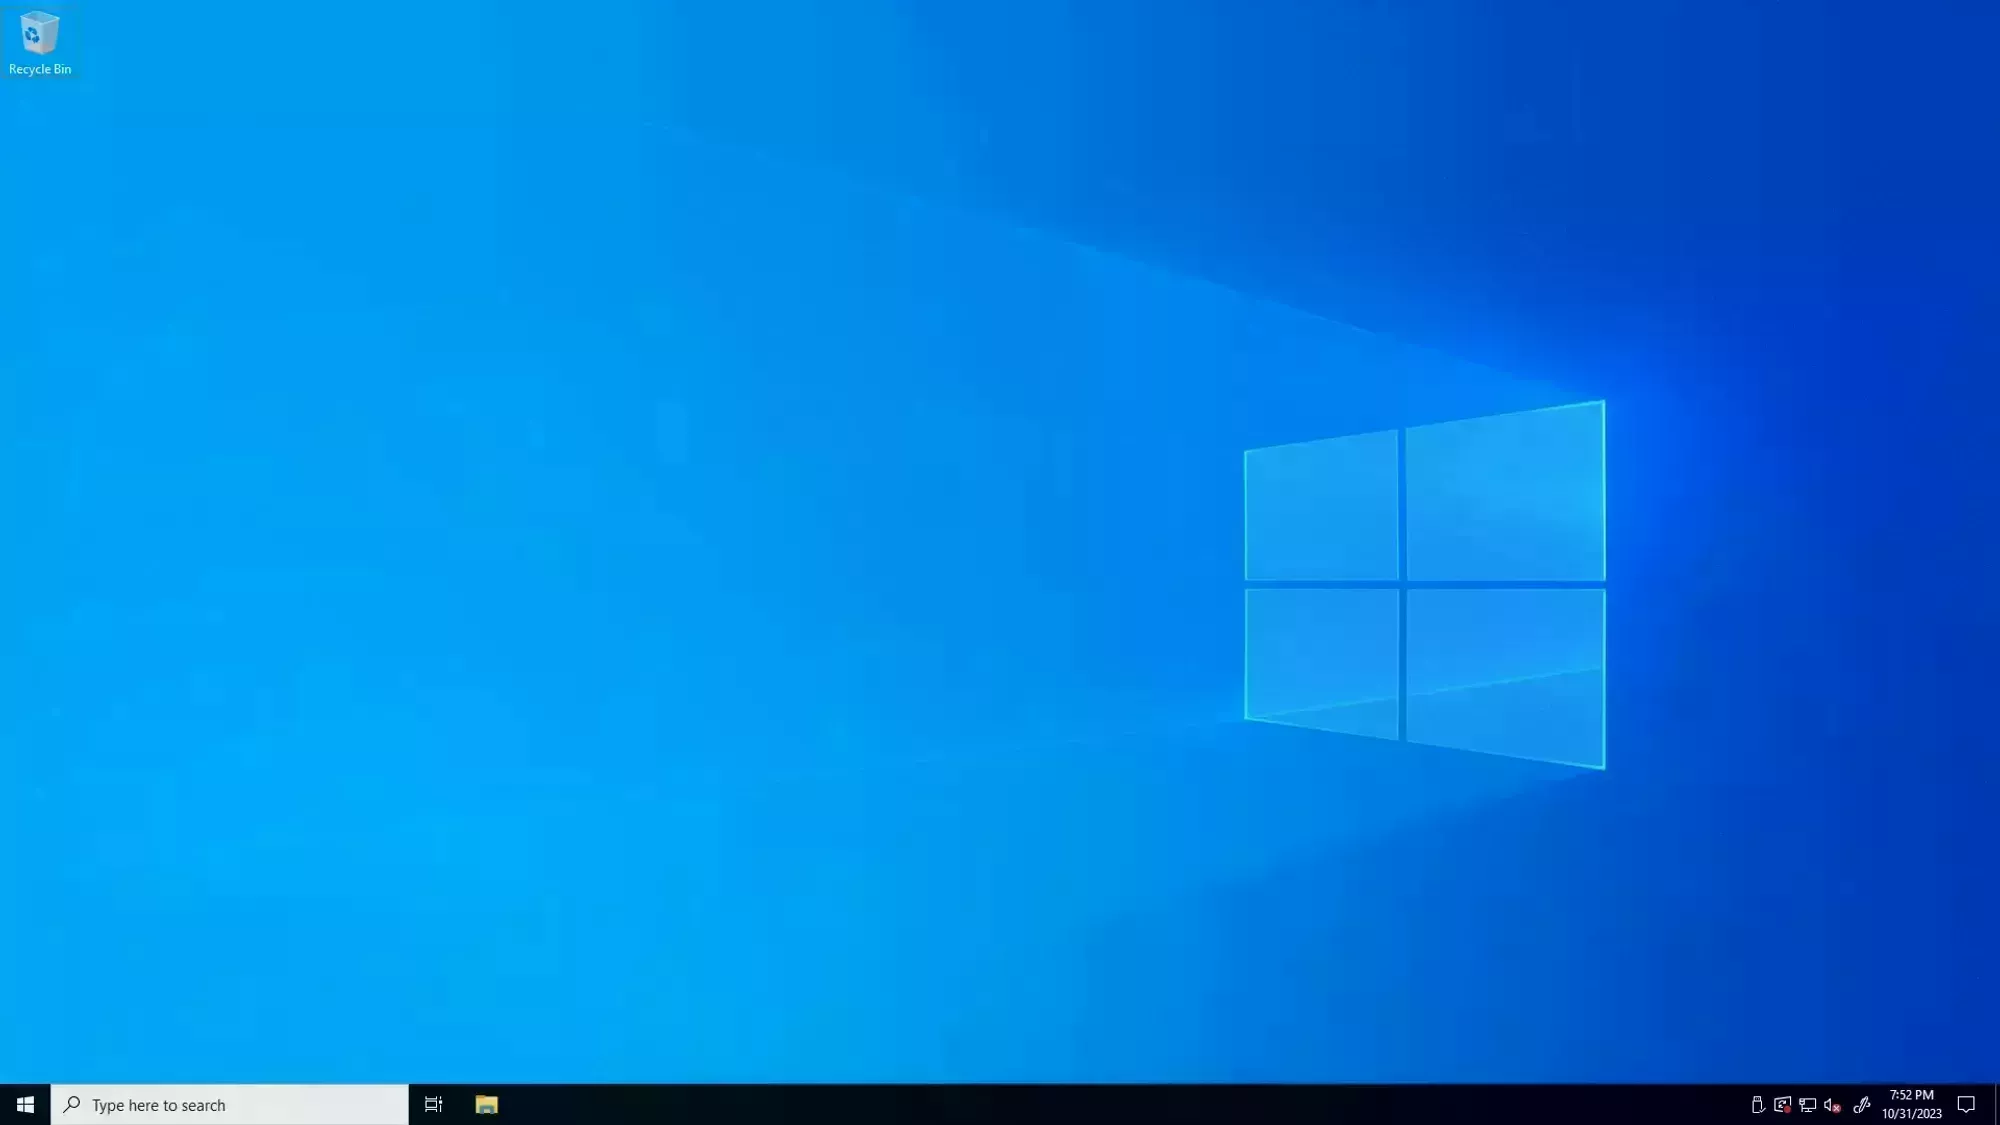 The default Windows 10 background and the Windows 0 taskbar with the search bar enabled.